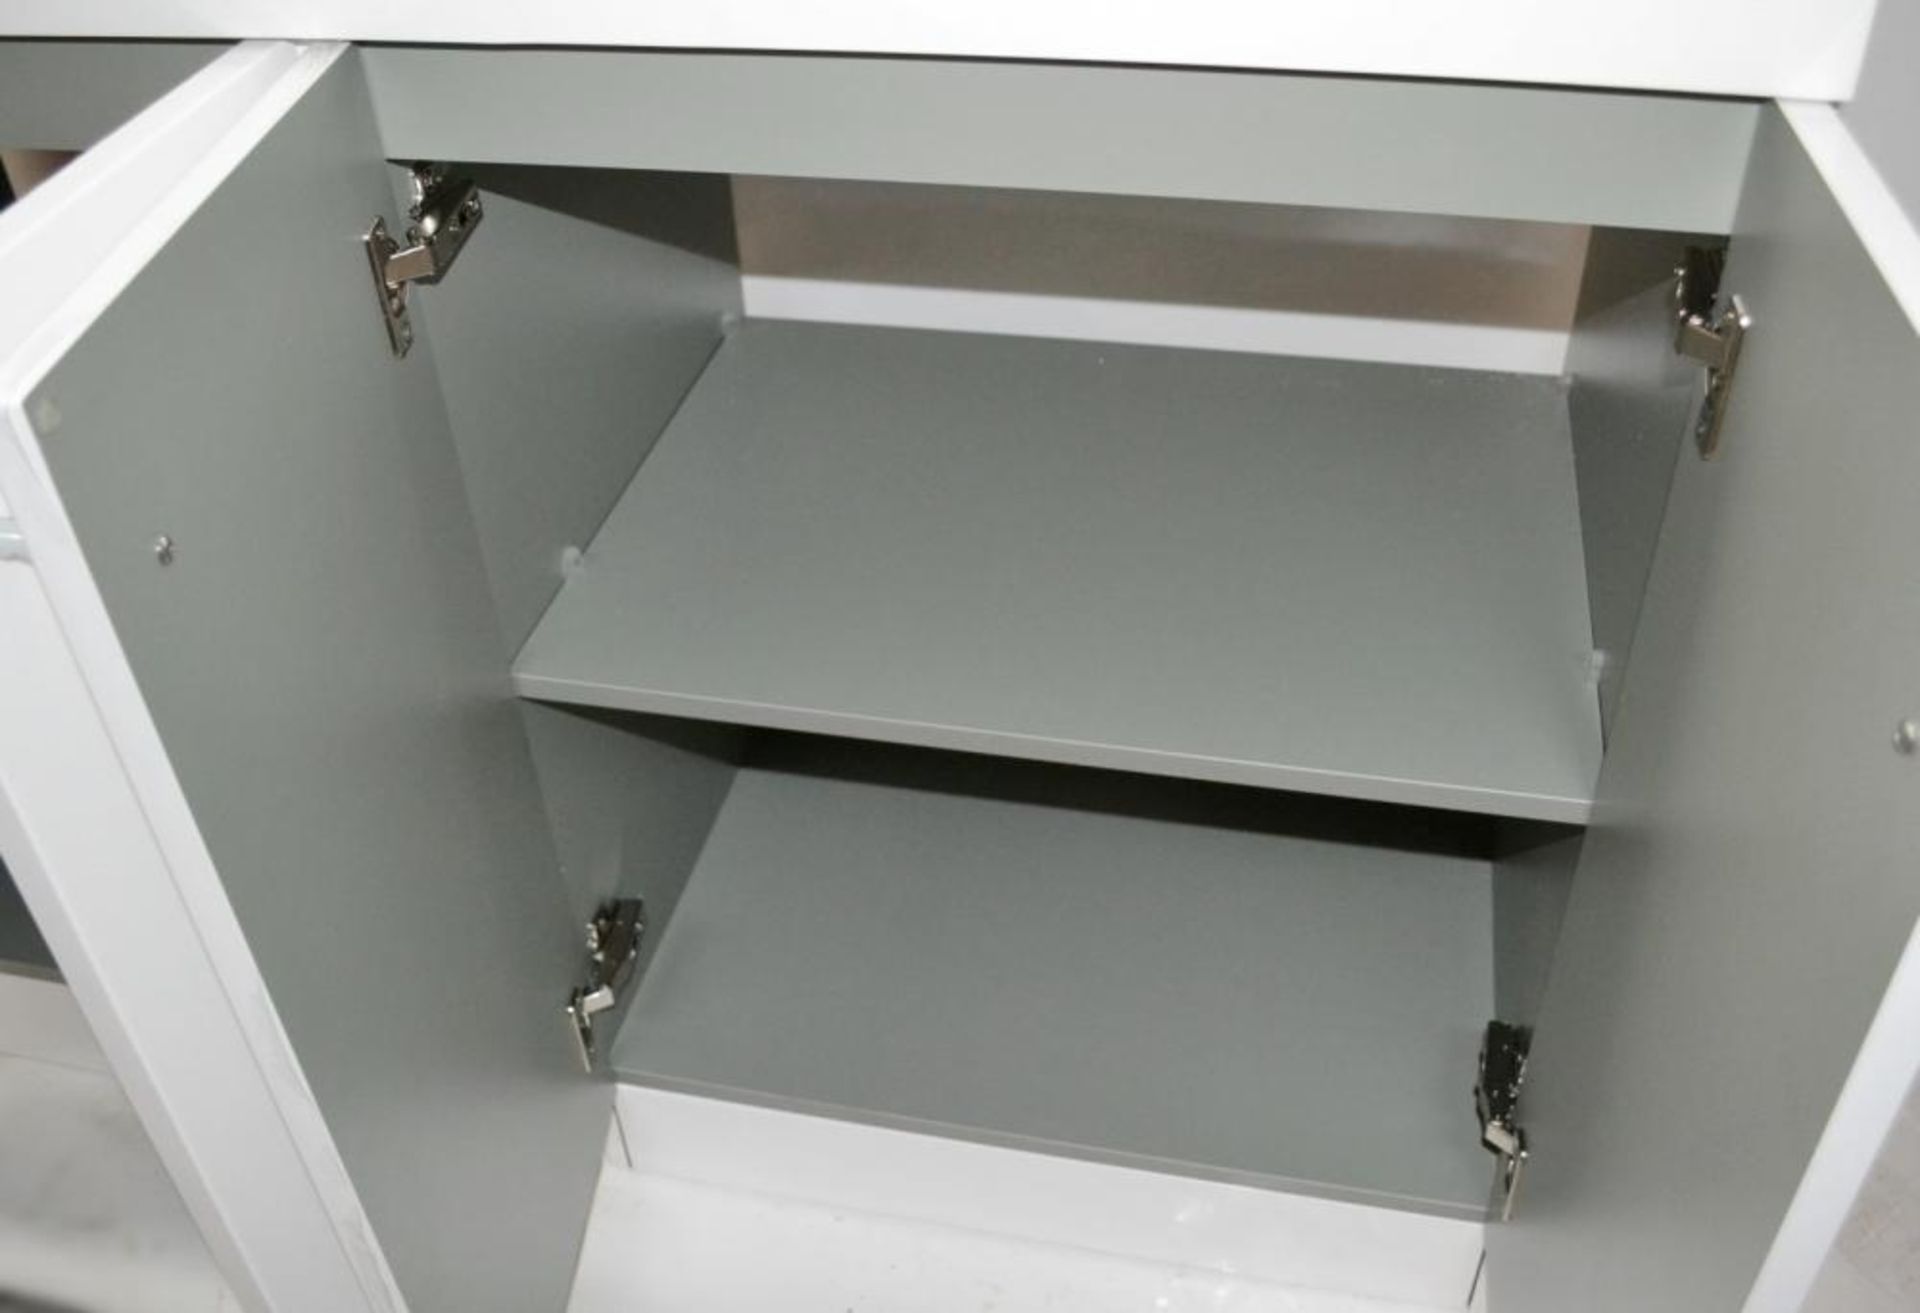 1 x His & Hers Double Bathroom Vanity Unit - 1200mm Wide - Features a High Gloss White Finish and - Image 3 of 7